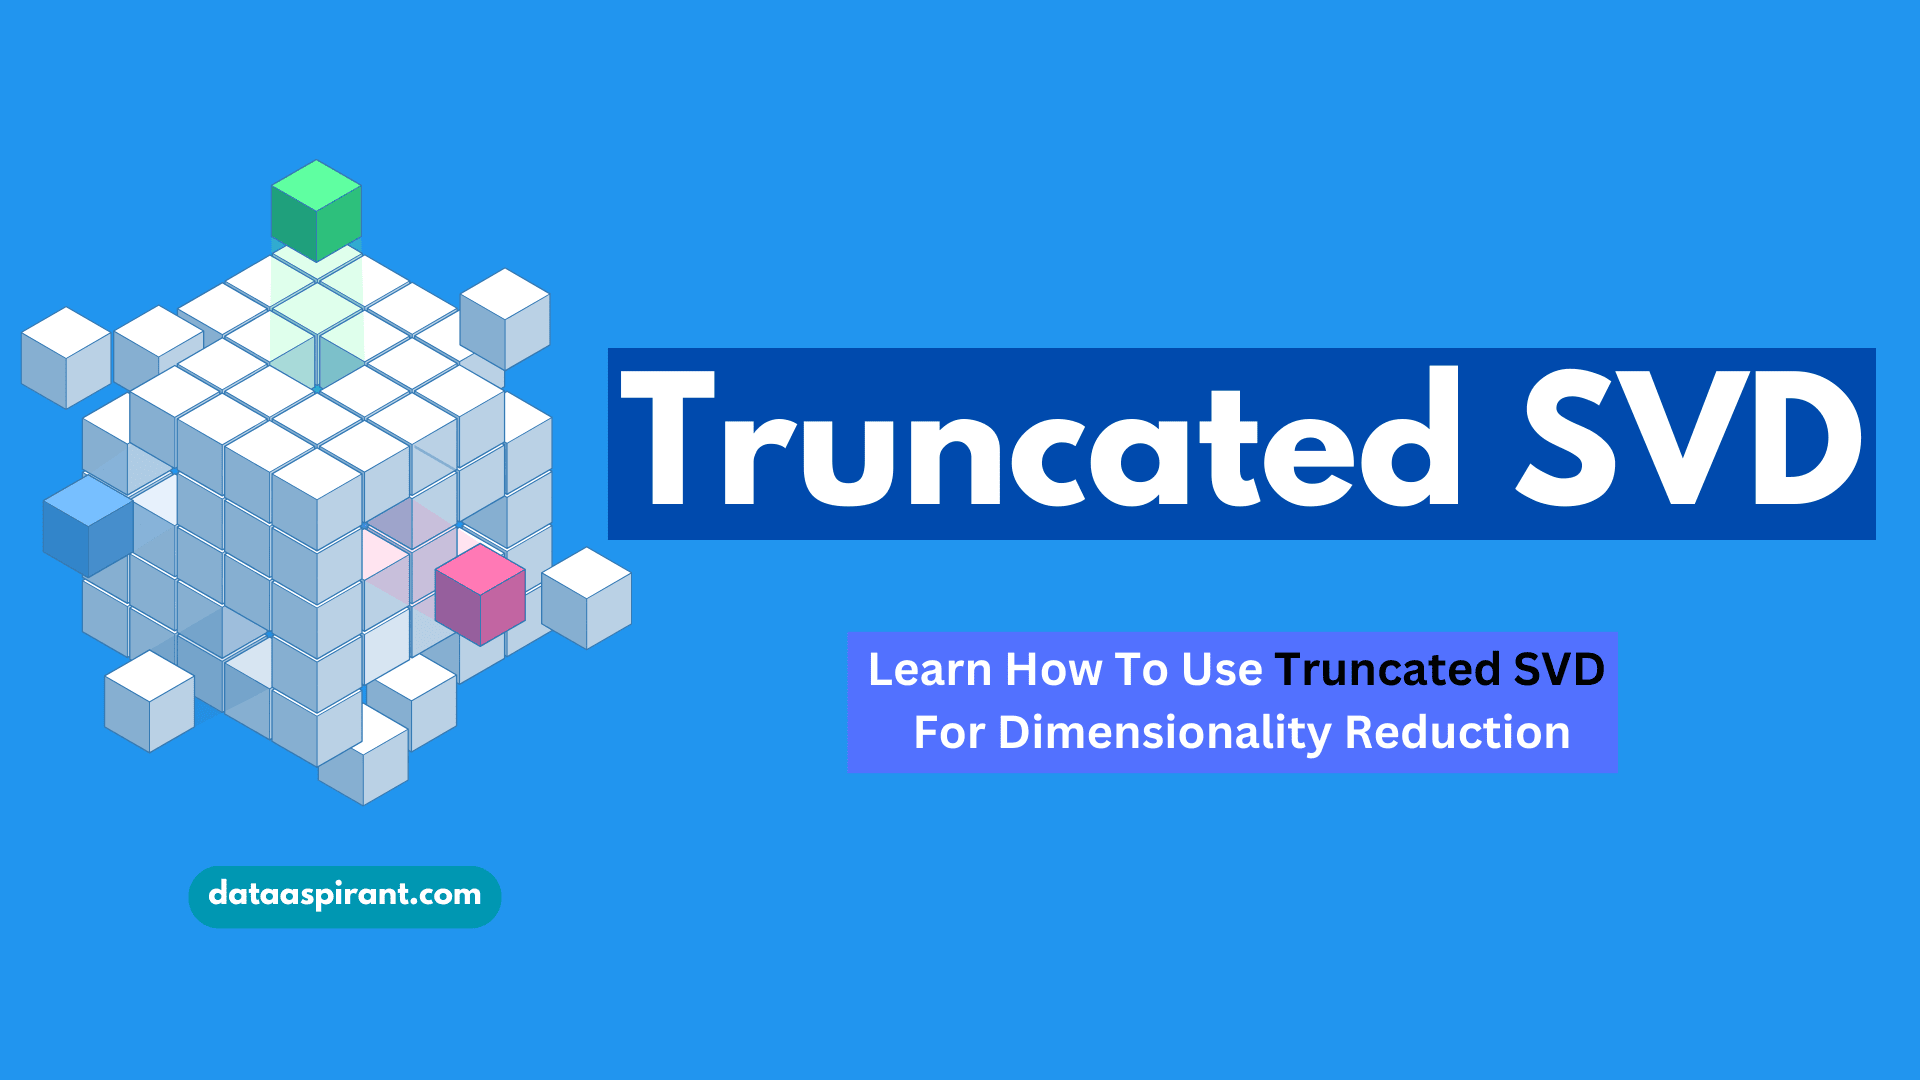 Ultimate Guide For Using Truncated SVD For Dimensionality Reduction